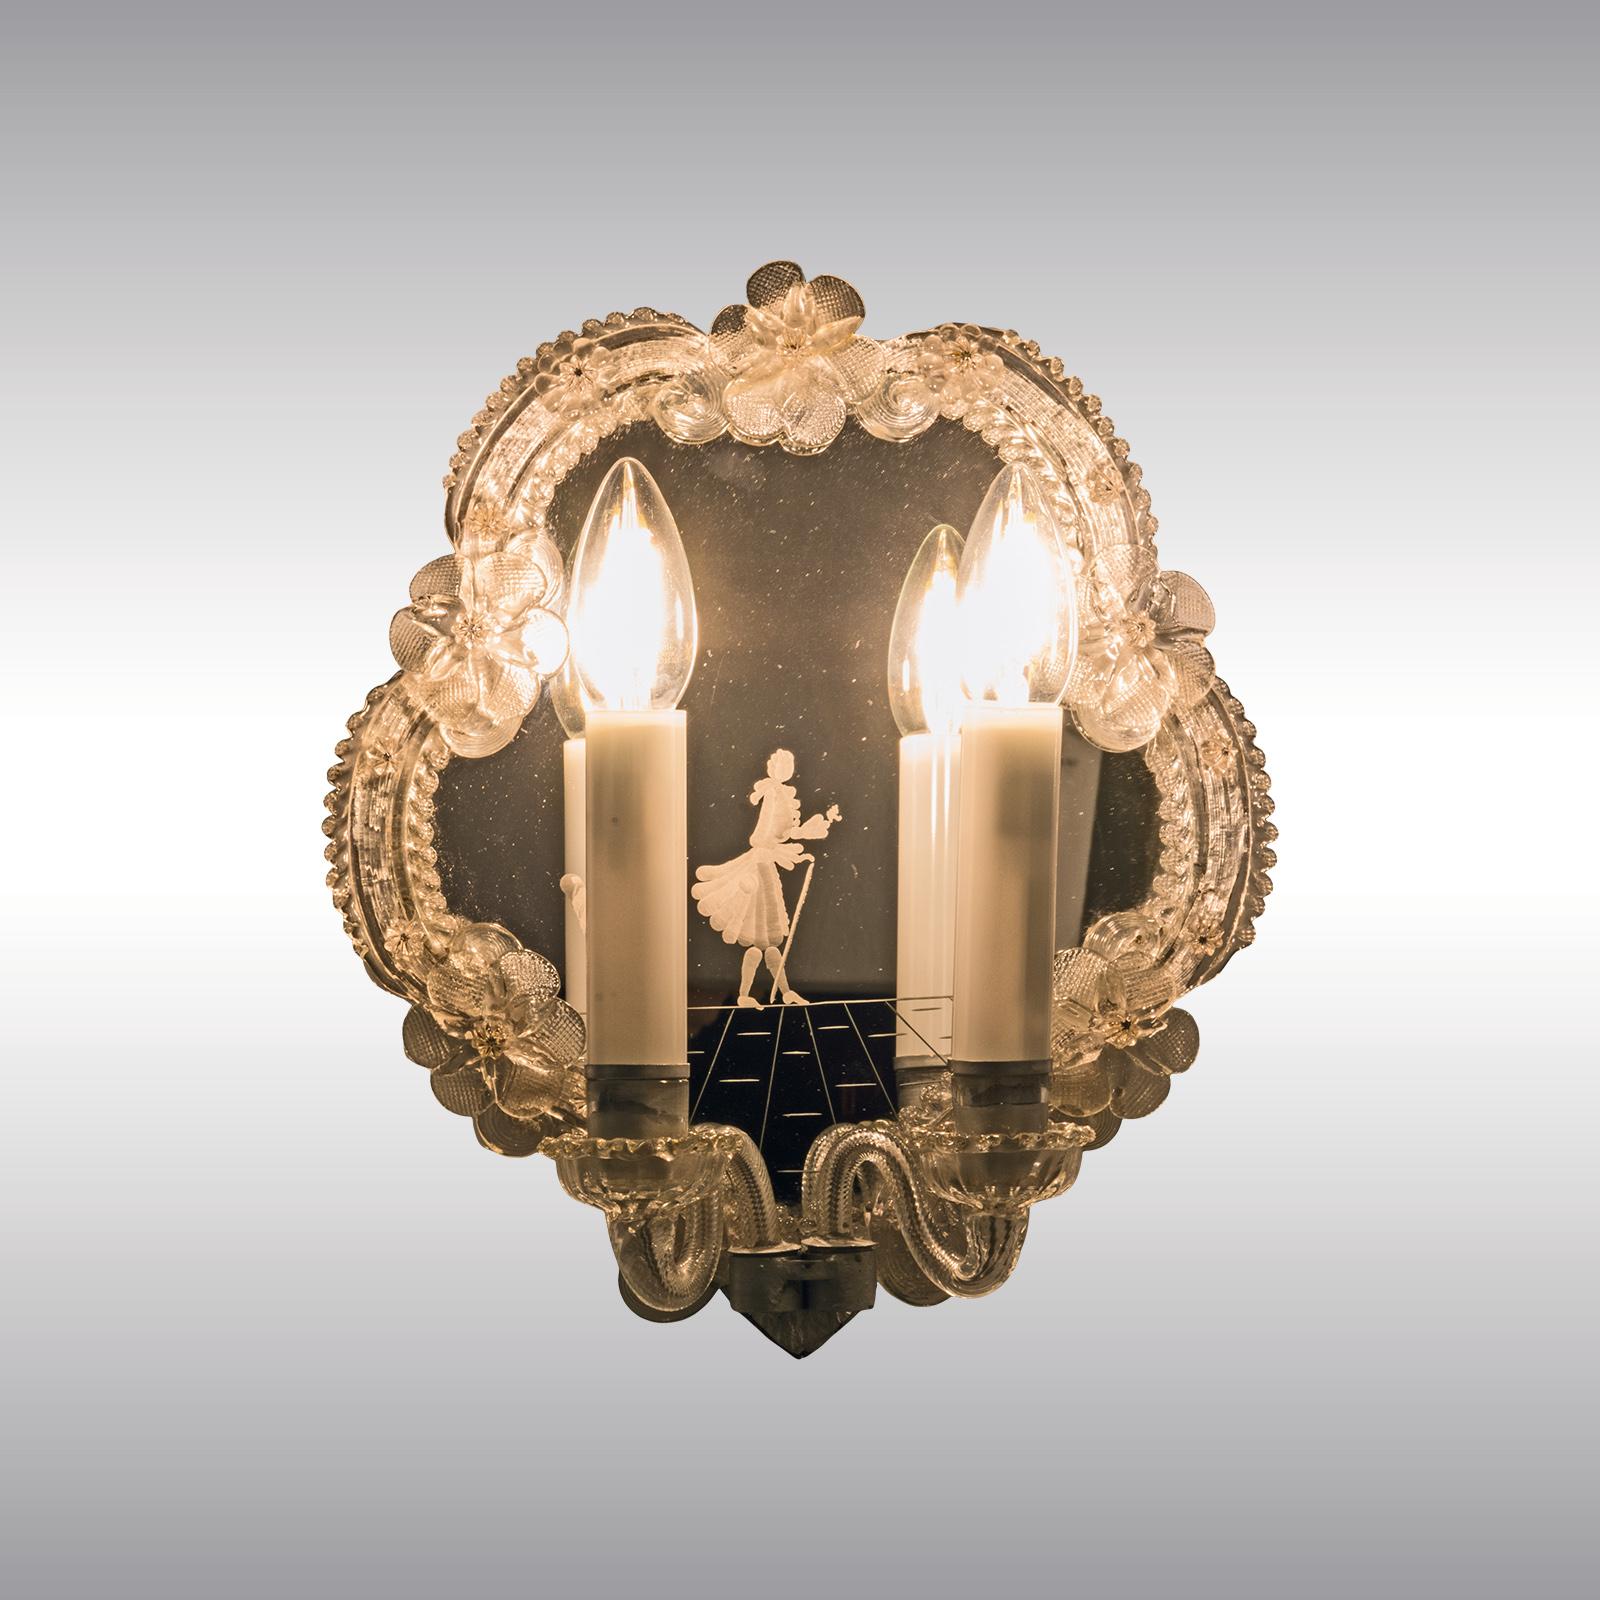 Glass engraved -Venetian Style Wall Lamp - Original of the time
Two arm glass-sconce with figurative engraved mirror.

